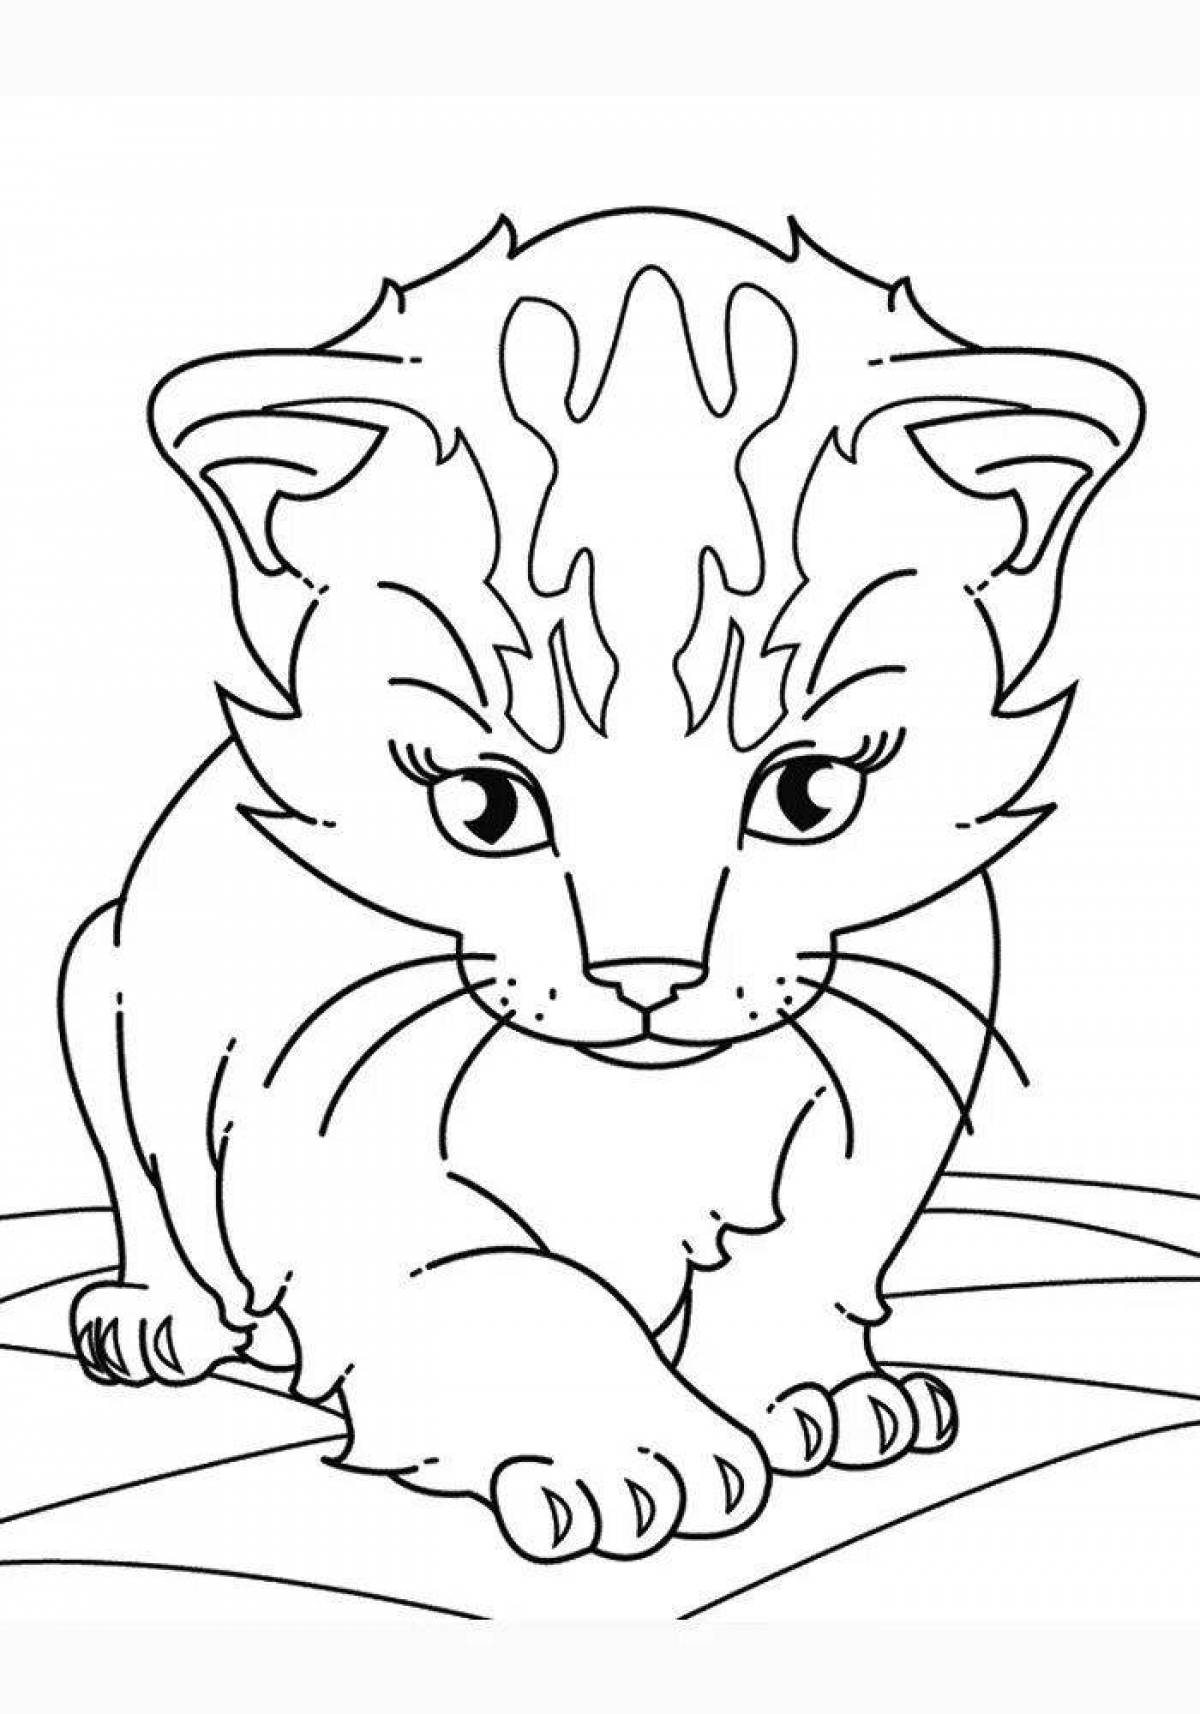 Adorable coloring book for girls with 9 year old animals